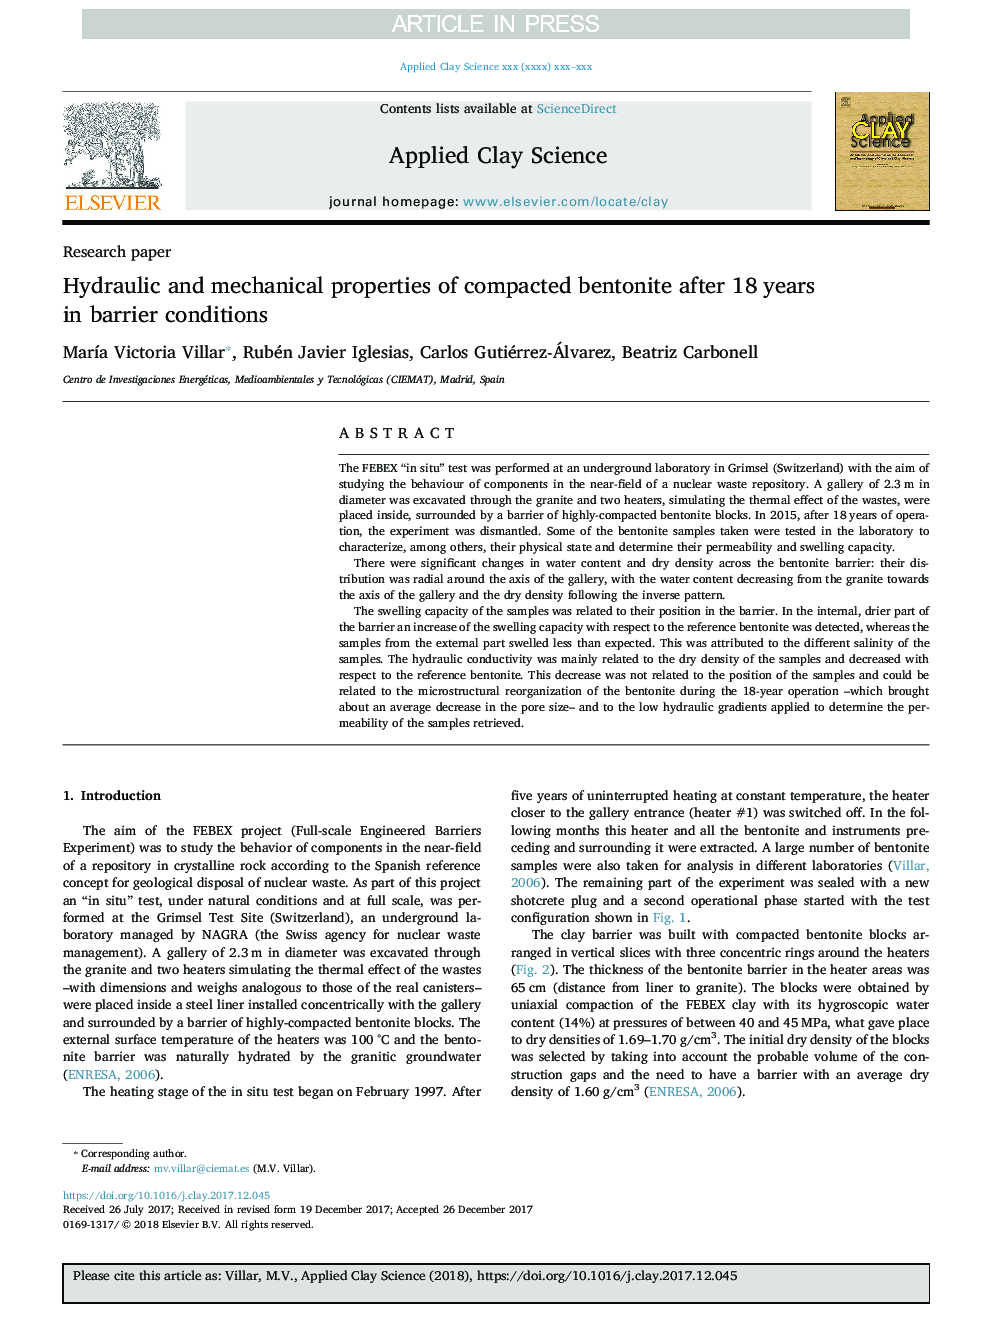 Hydraulic and mechanical properties of compacted bentonite after 18Â years in barrier conditions